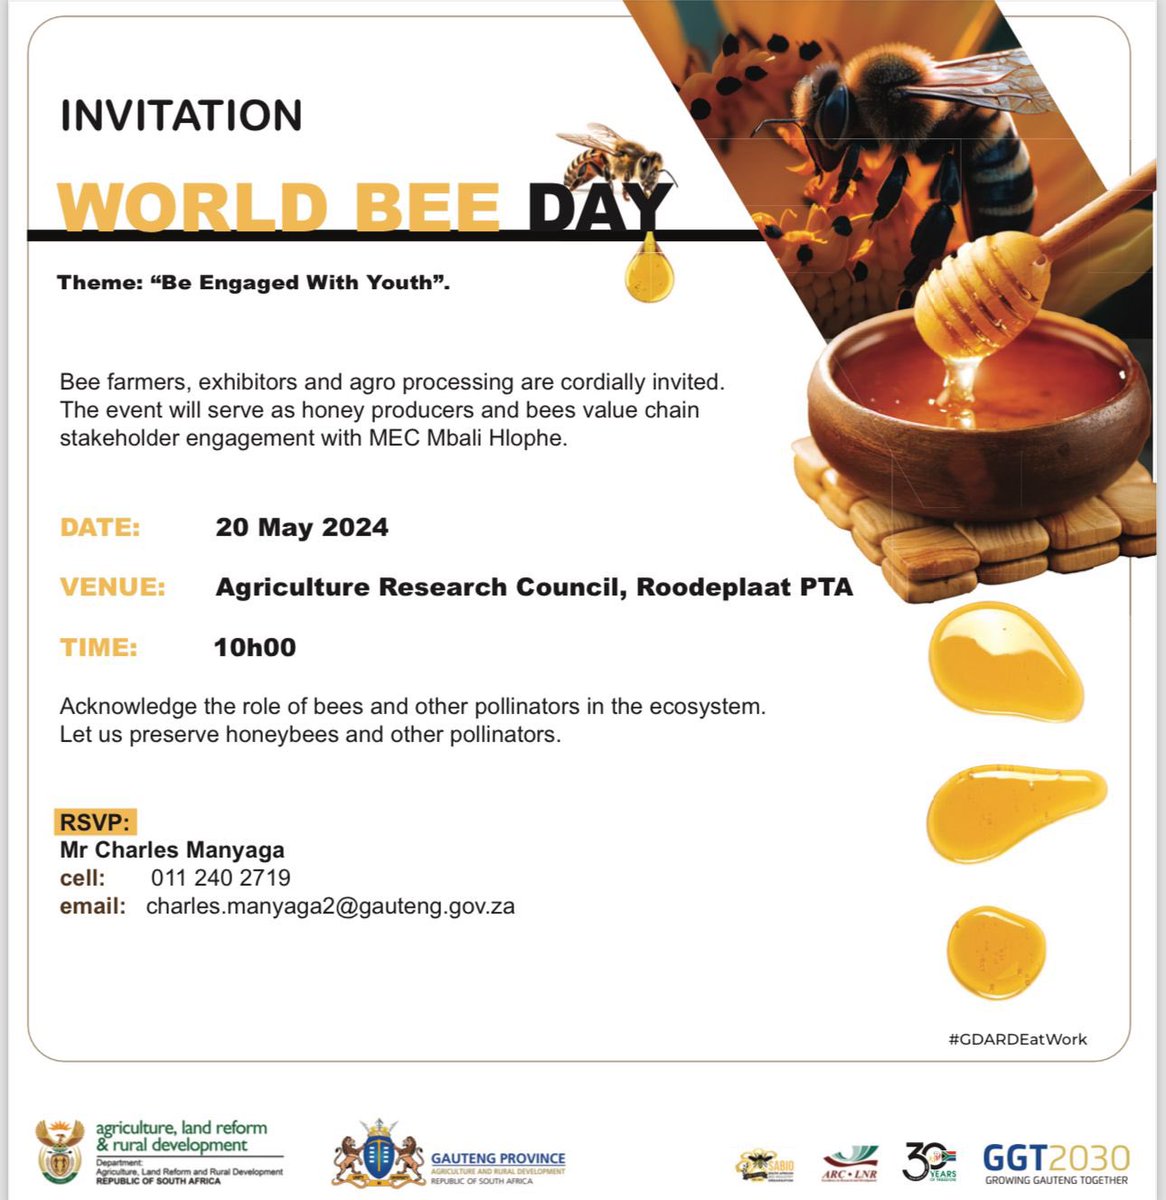 Bee farmers, exhibitors and agro processing are cordially invited. The event will serve as honey producers and bees value chain stakeholder engagement with MEC Mbali Hlophe.

#GrowingGautengTogether #WorldBeeDay